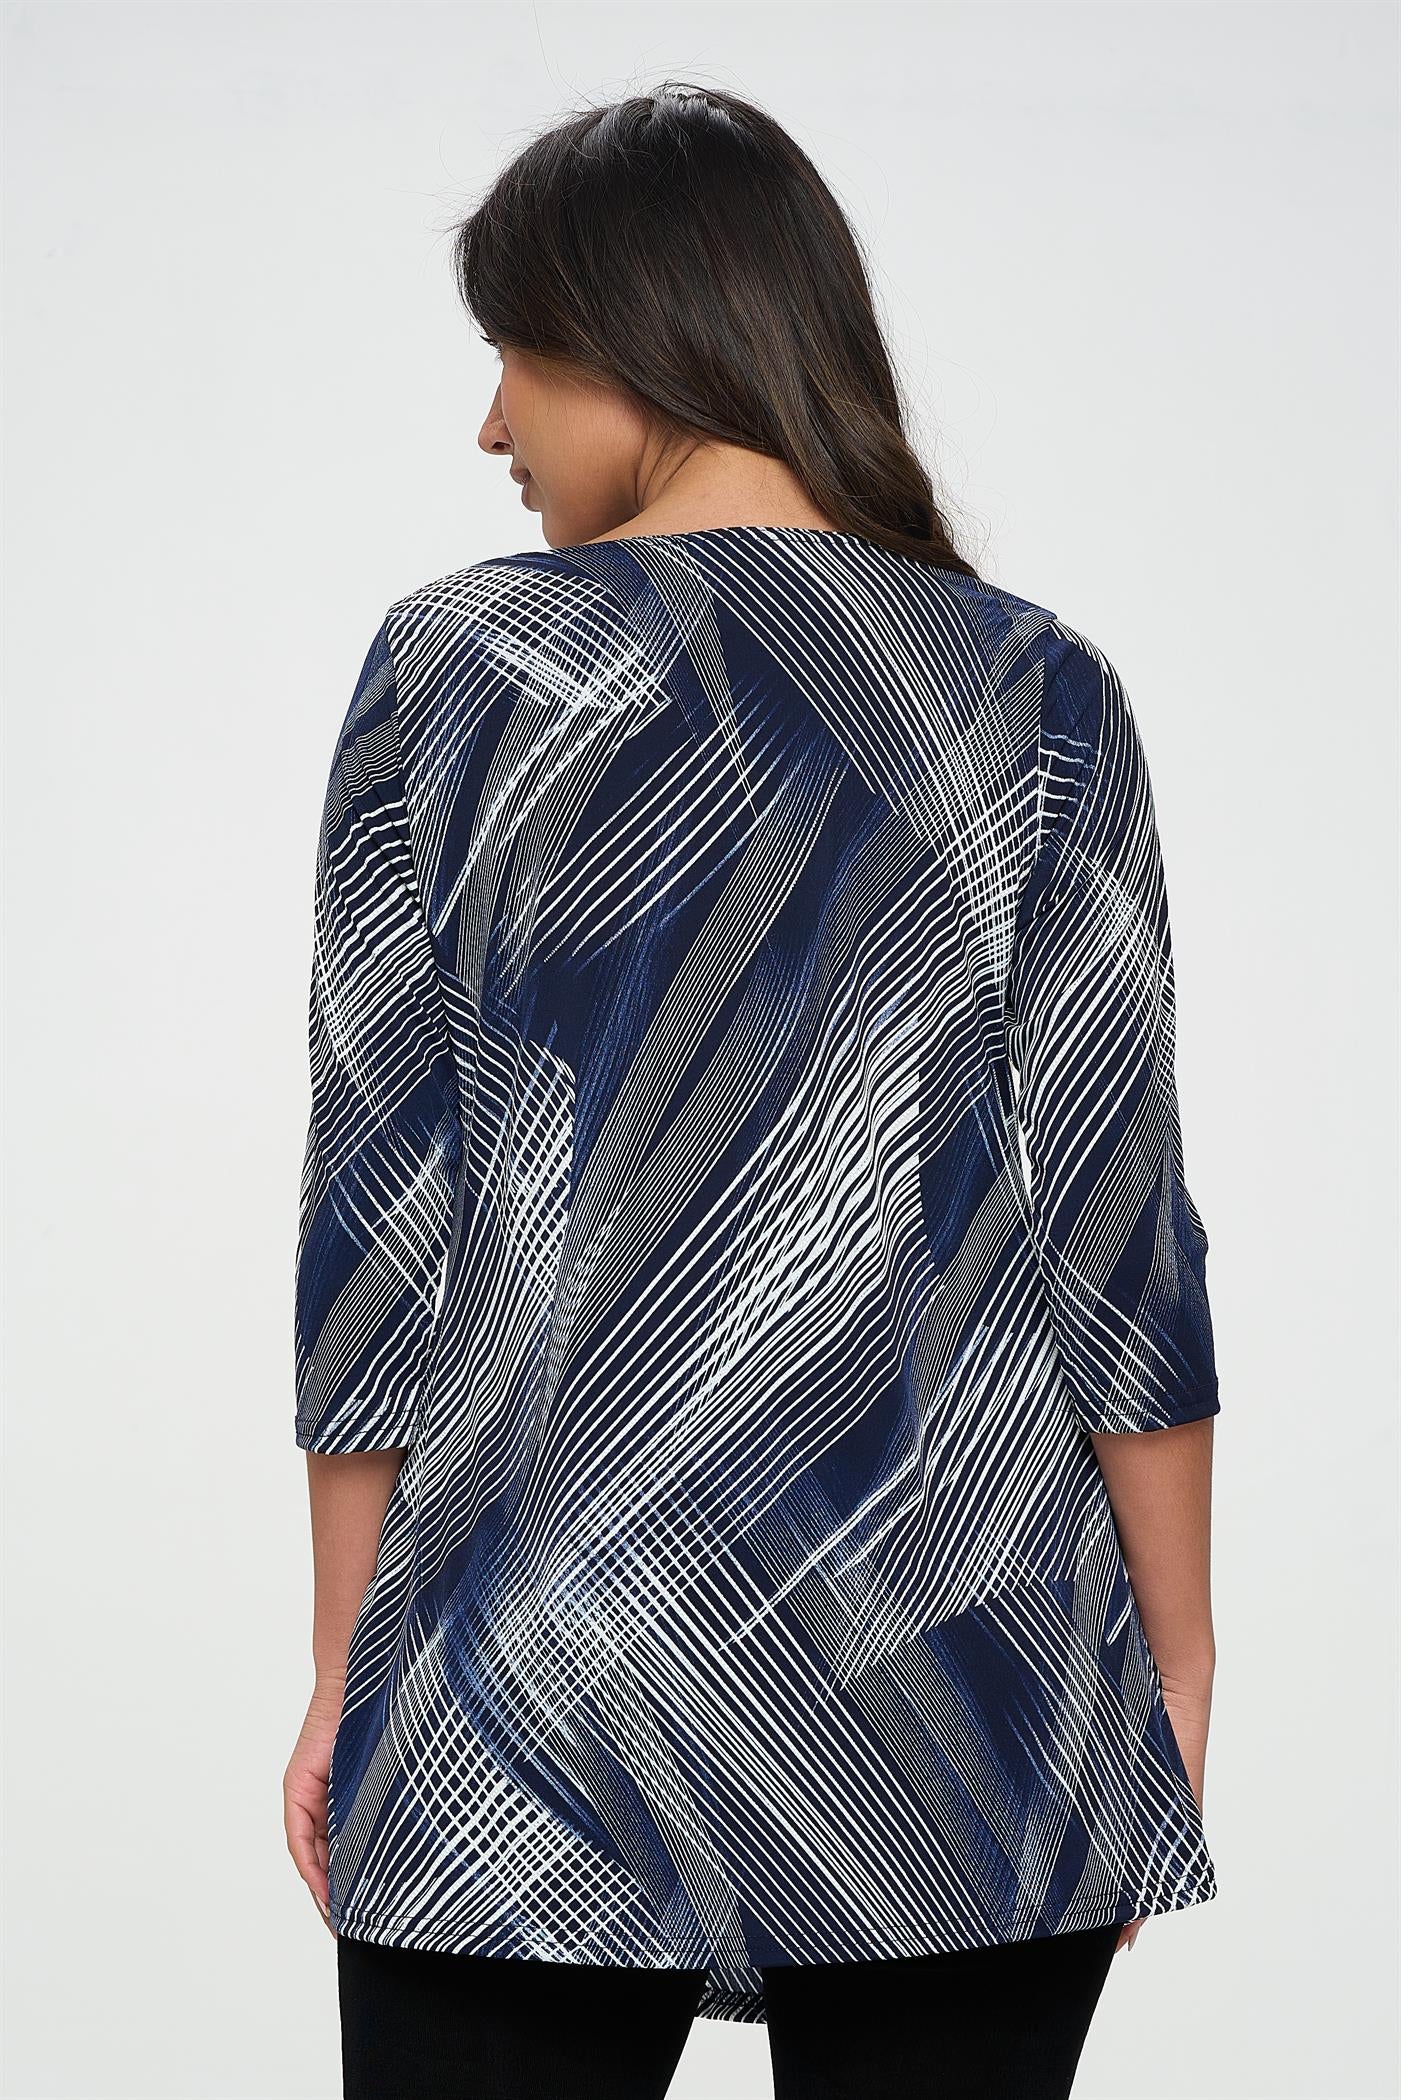 94% polyester / 6% spandex  This timeless tunic has a classic look with soft lines, 3/4-length sleeves, and its flowy fabric blend--guaranteed to be a hit the very first time you rock it!  Hand or machine wash in cold water.  Made in U.S.A